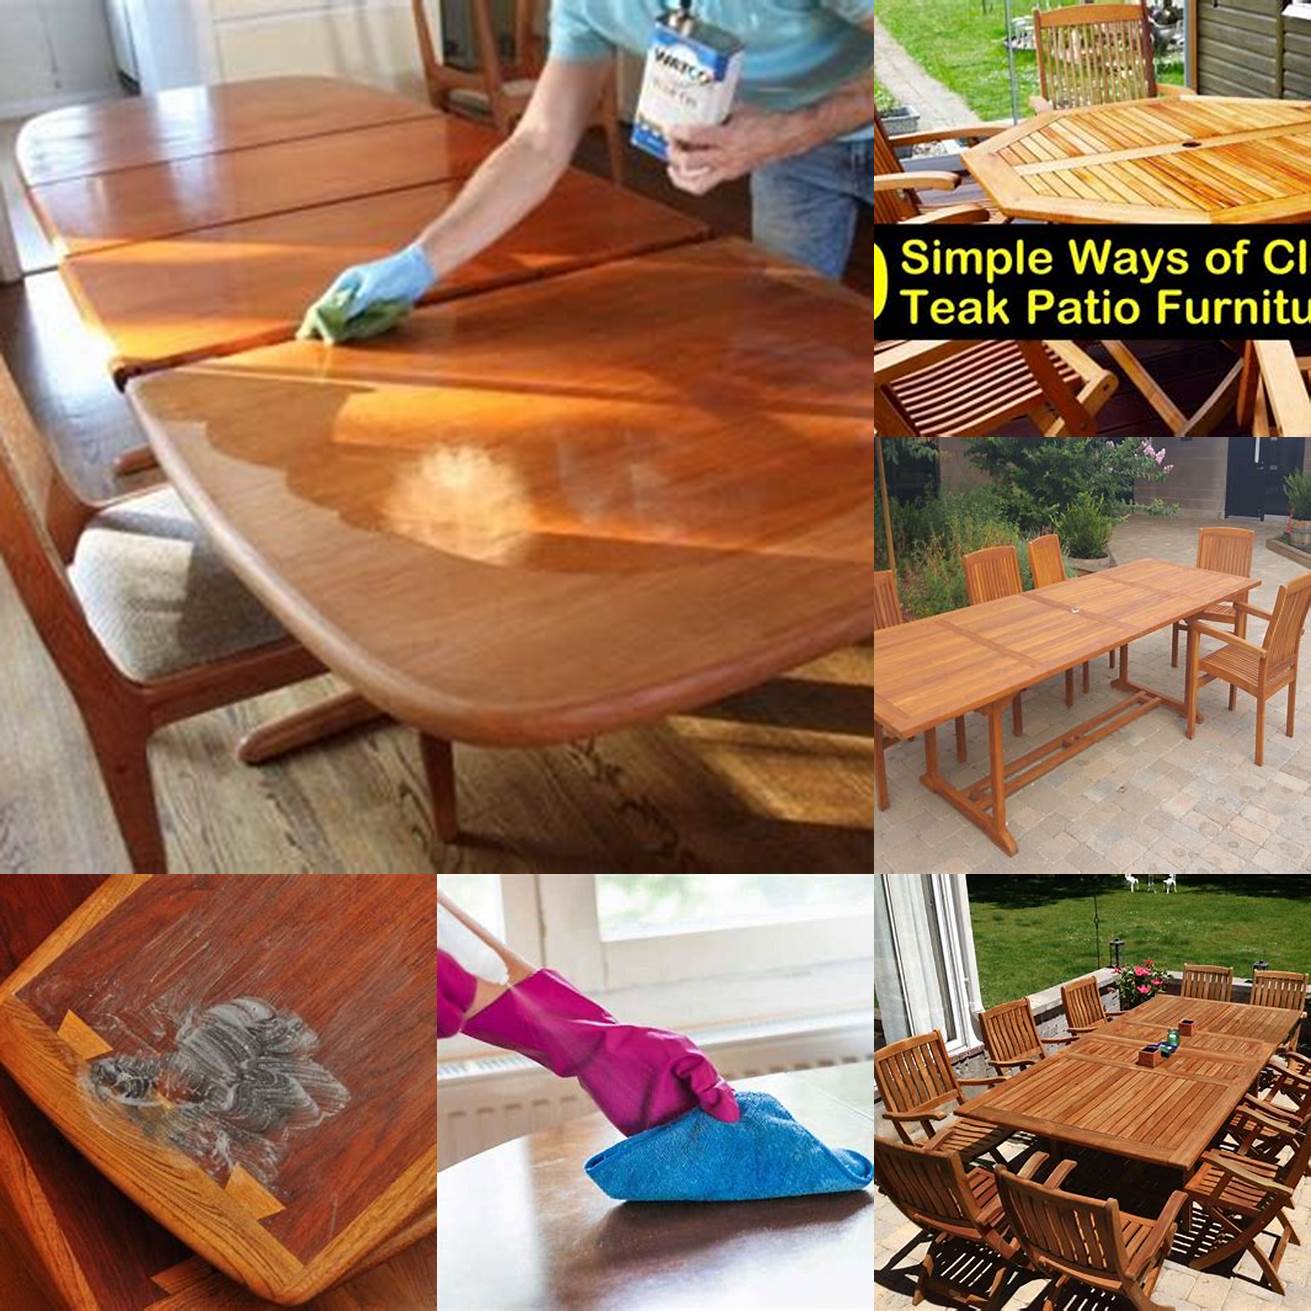 An image of a teak table and chairs being cleaned with a mild soap and water solution